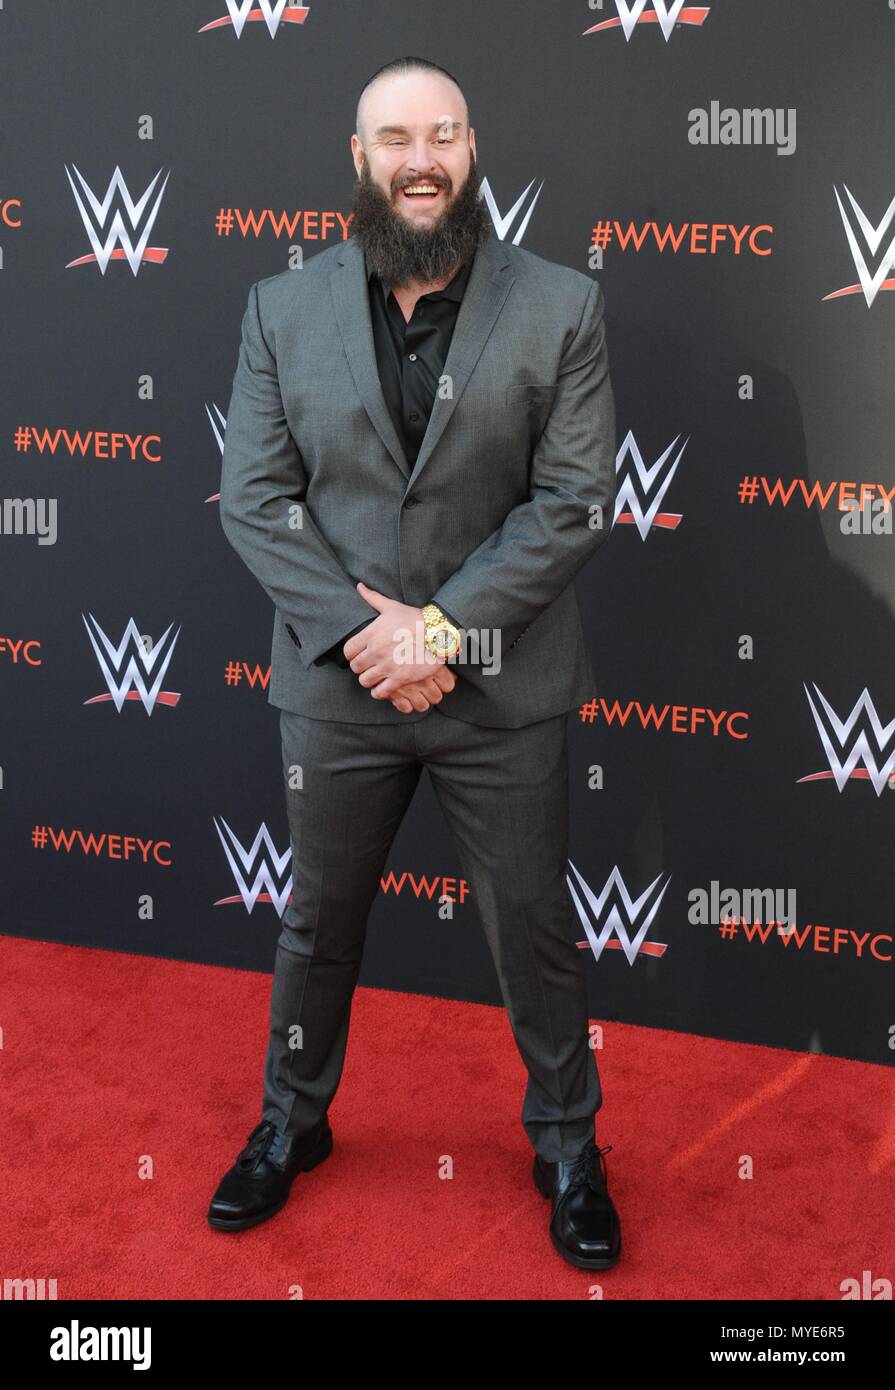 Braun Strowman at arrivals for World Wrestling Entertainment WWE FYC Event, Saban Media Center at the Television Academy, North Hollywood, CA June 6, 2018. Photo By: Dee Cercone/Everett Collection Stock Photo